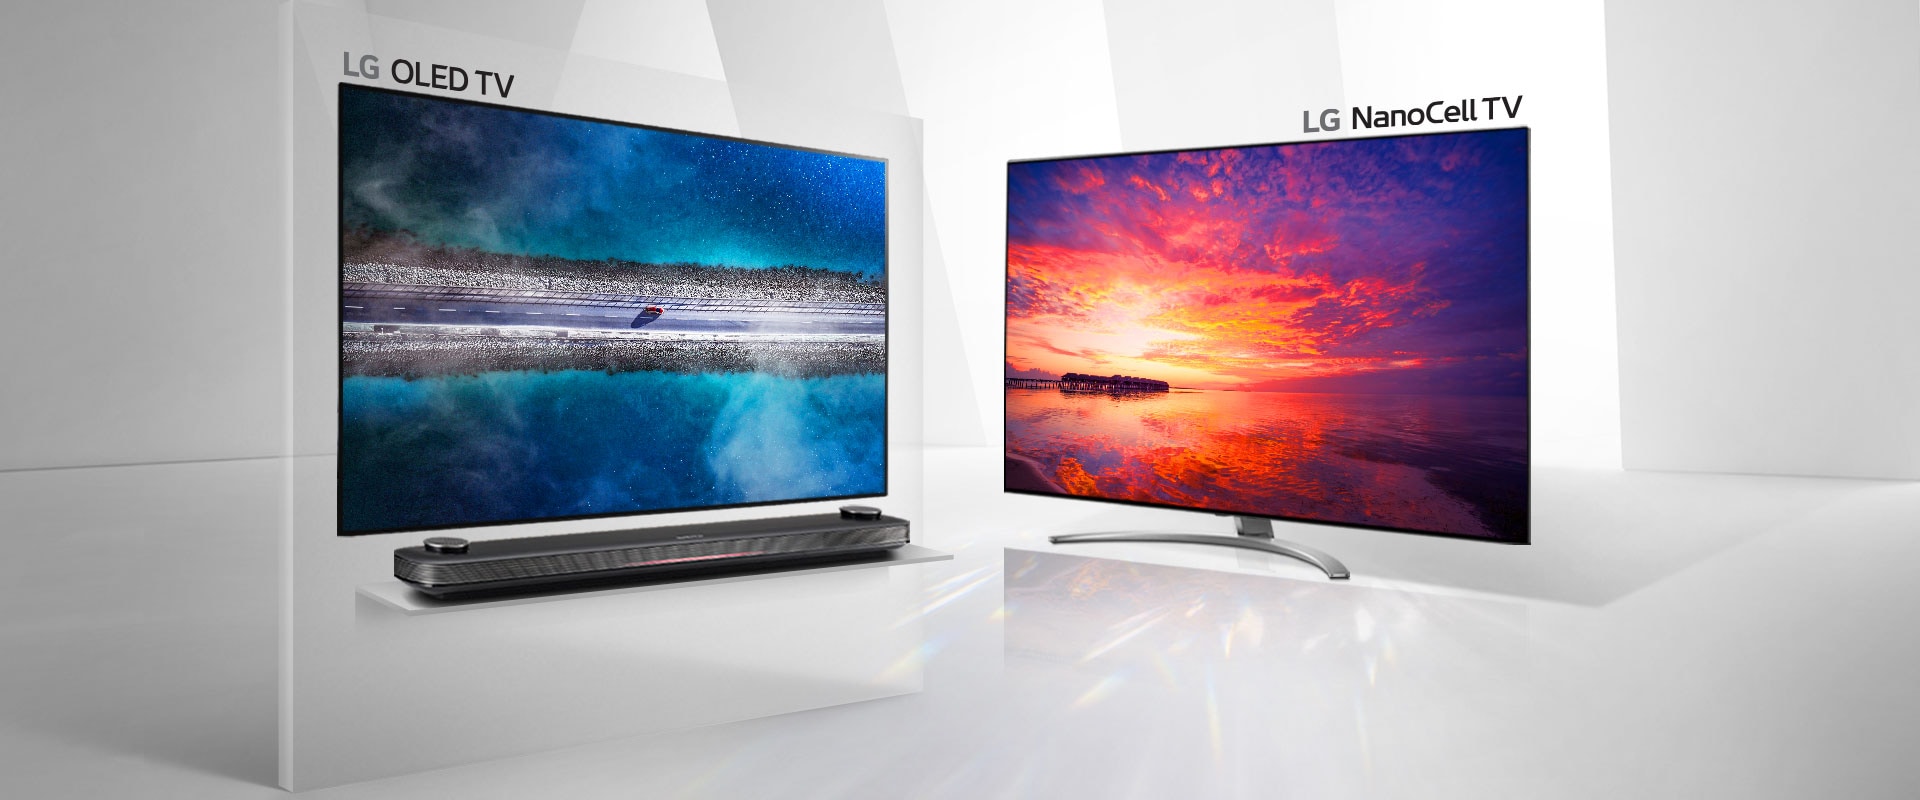 Why OLED and NanoCell TV